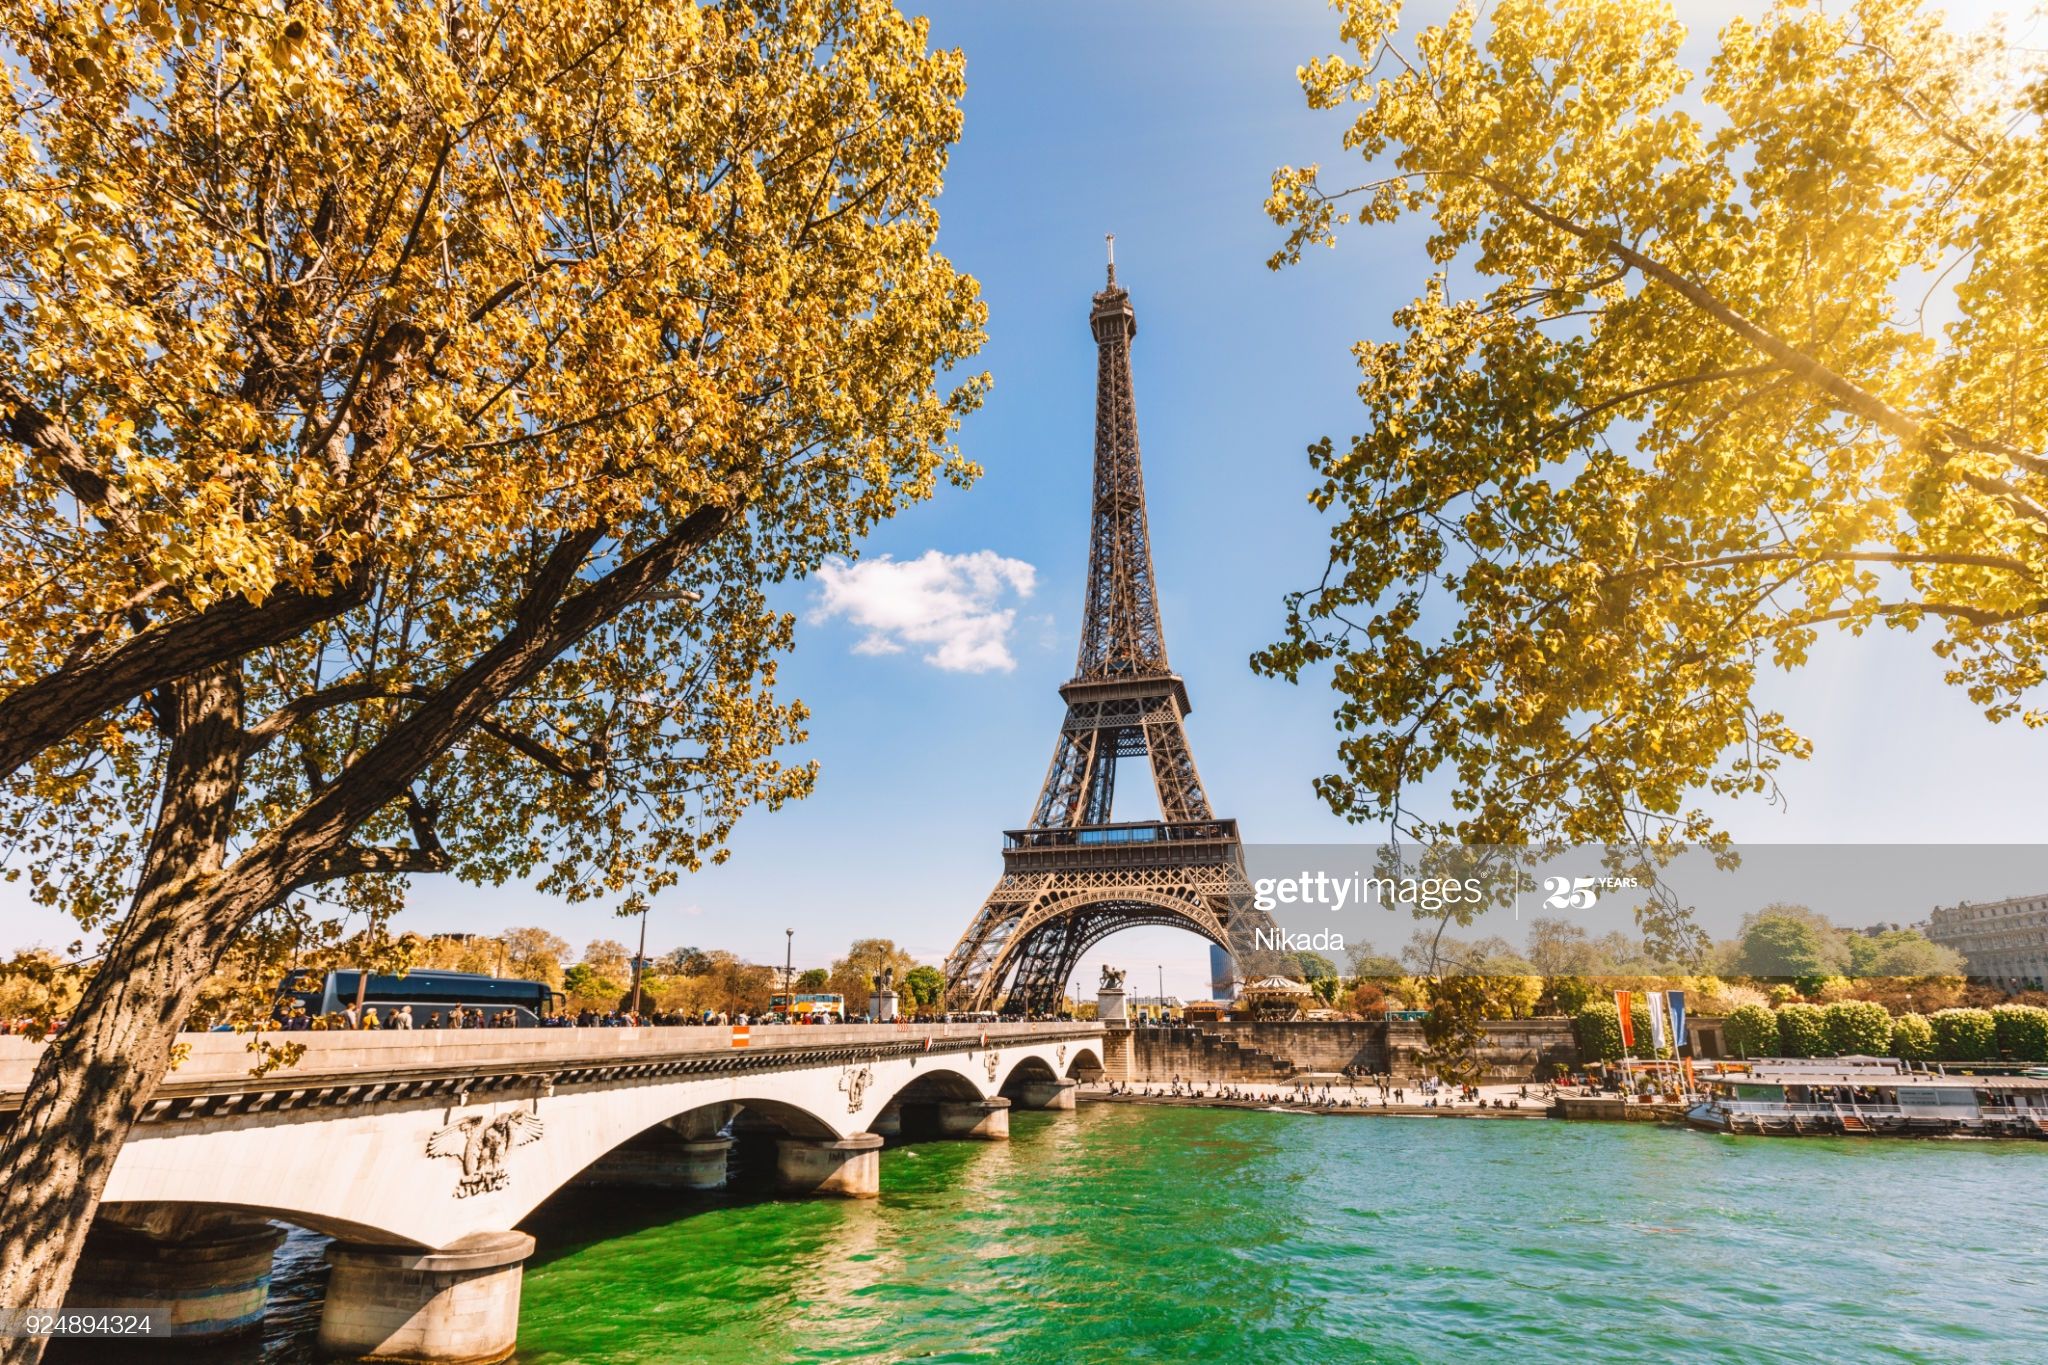 Paris Picture, Eiffel, Image, Lovely, Place, Spring, Tower, World